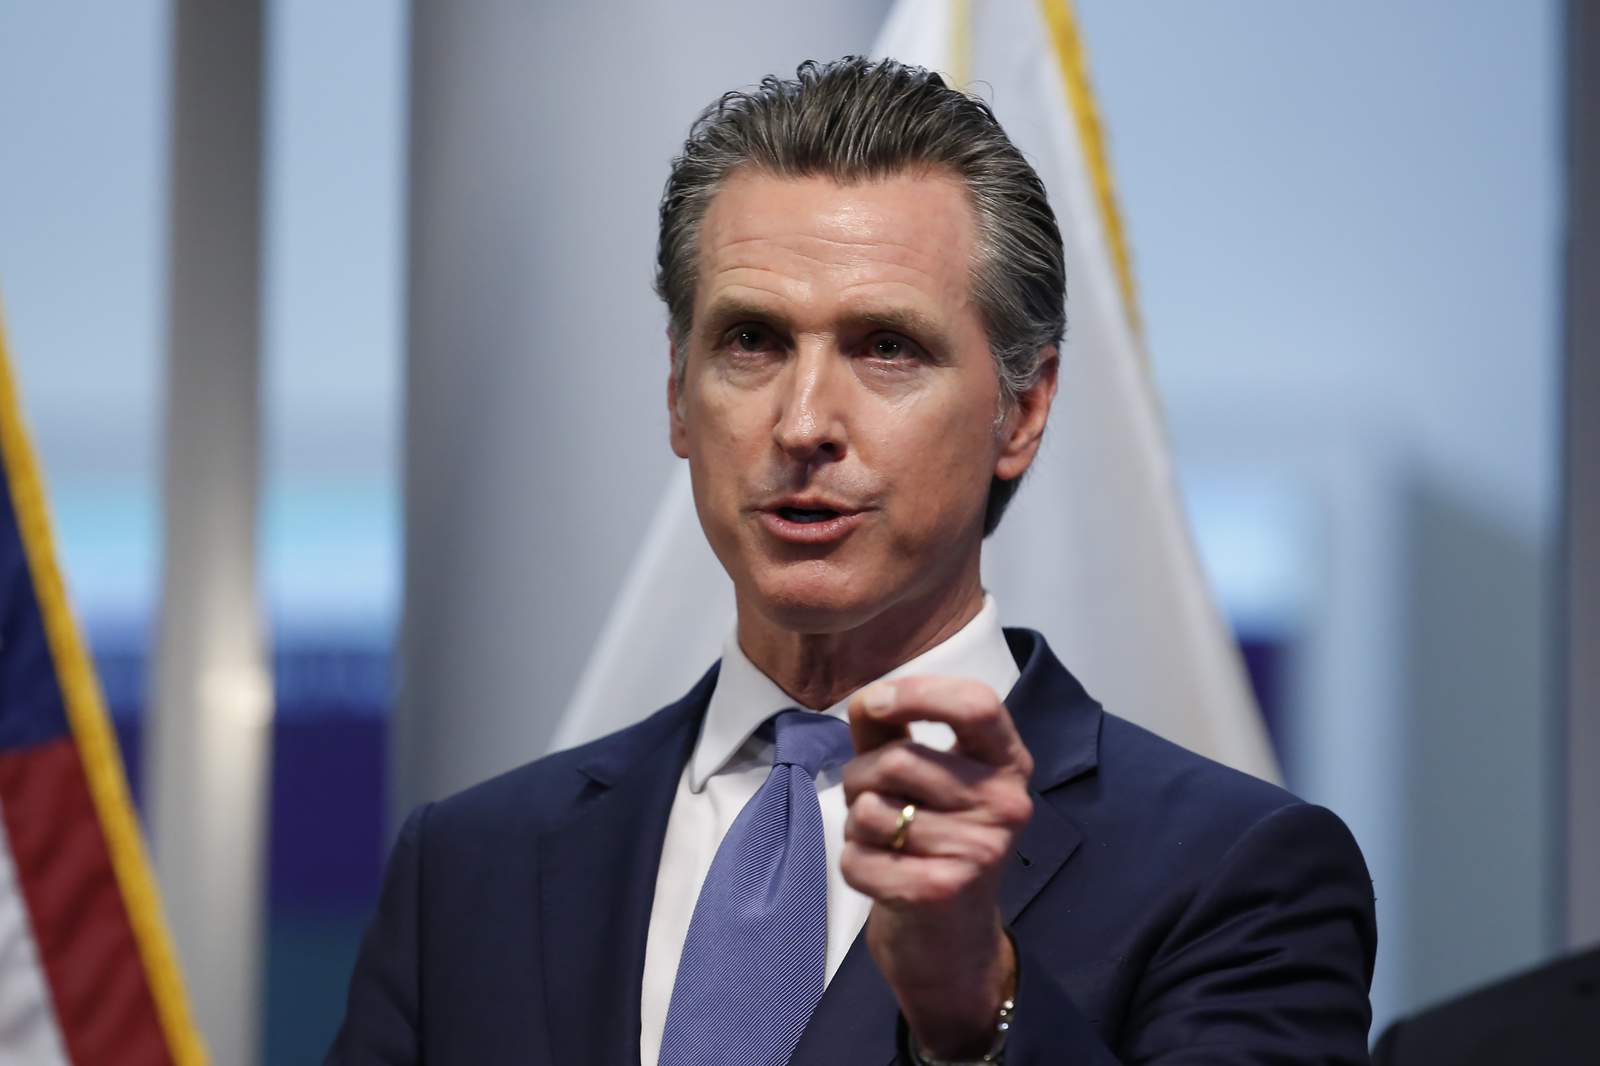 California governor orders statewide stayathome order